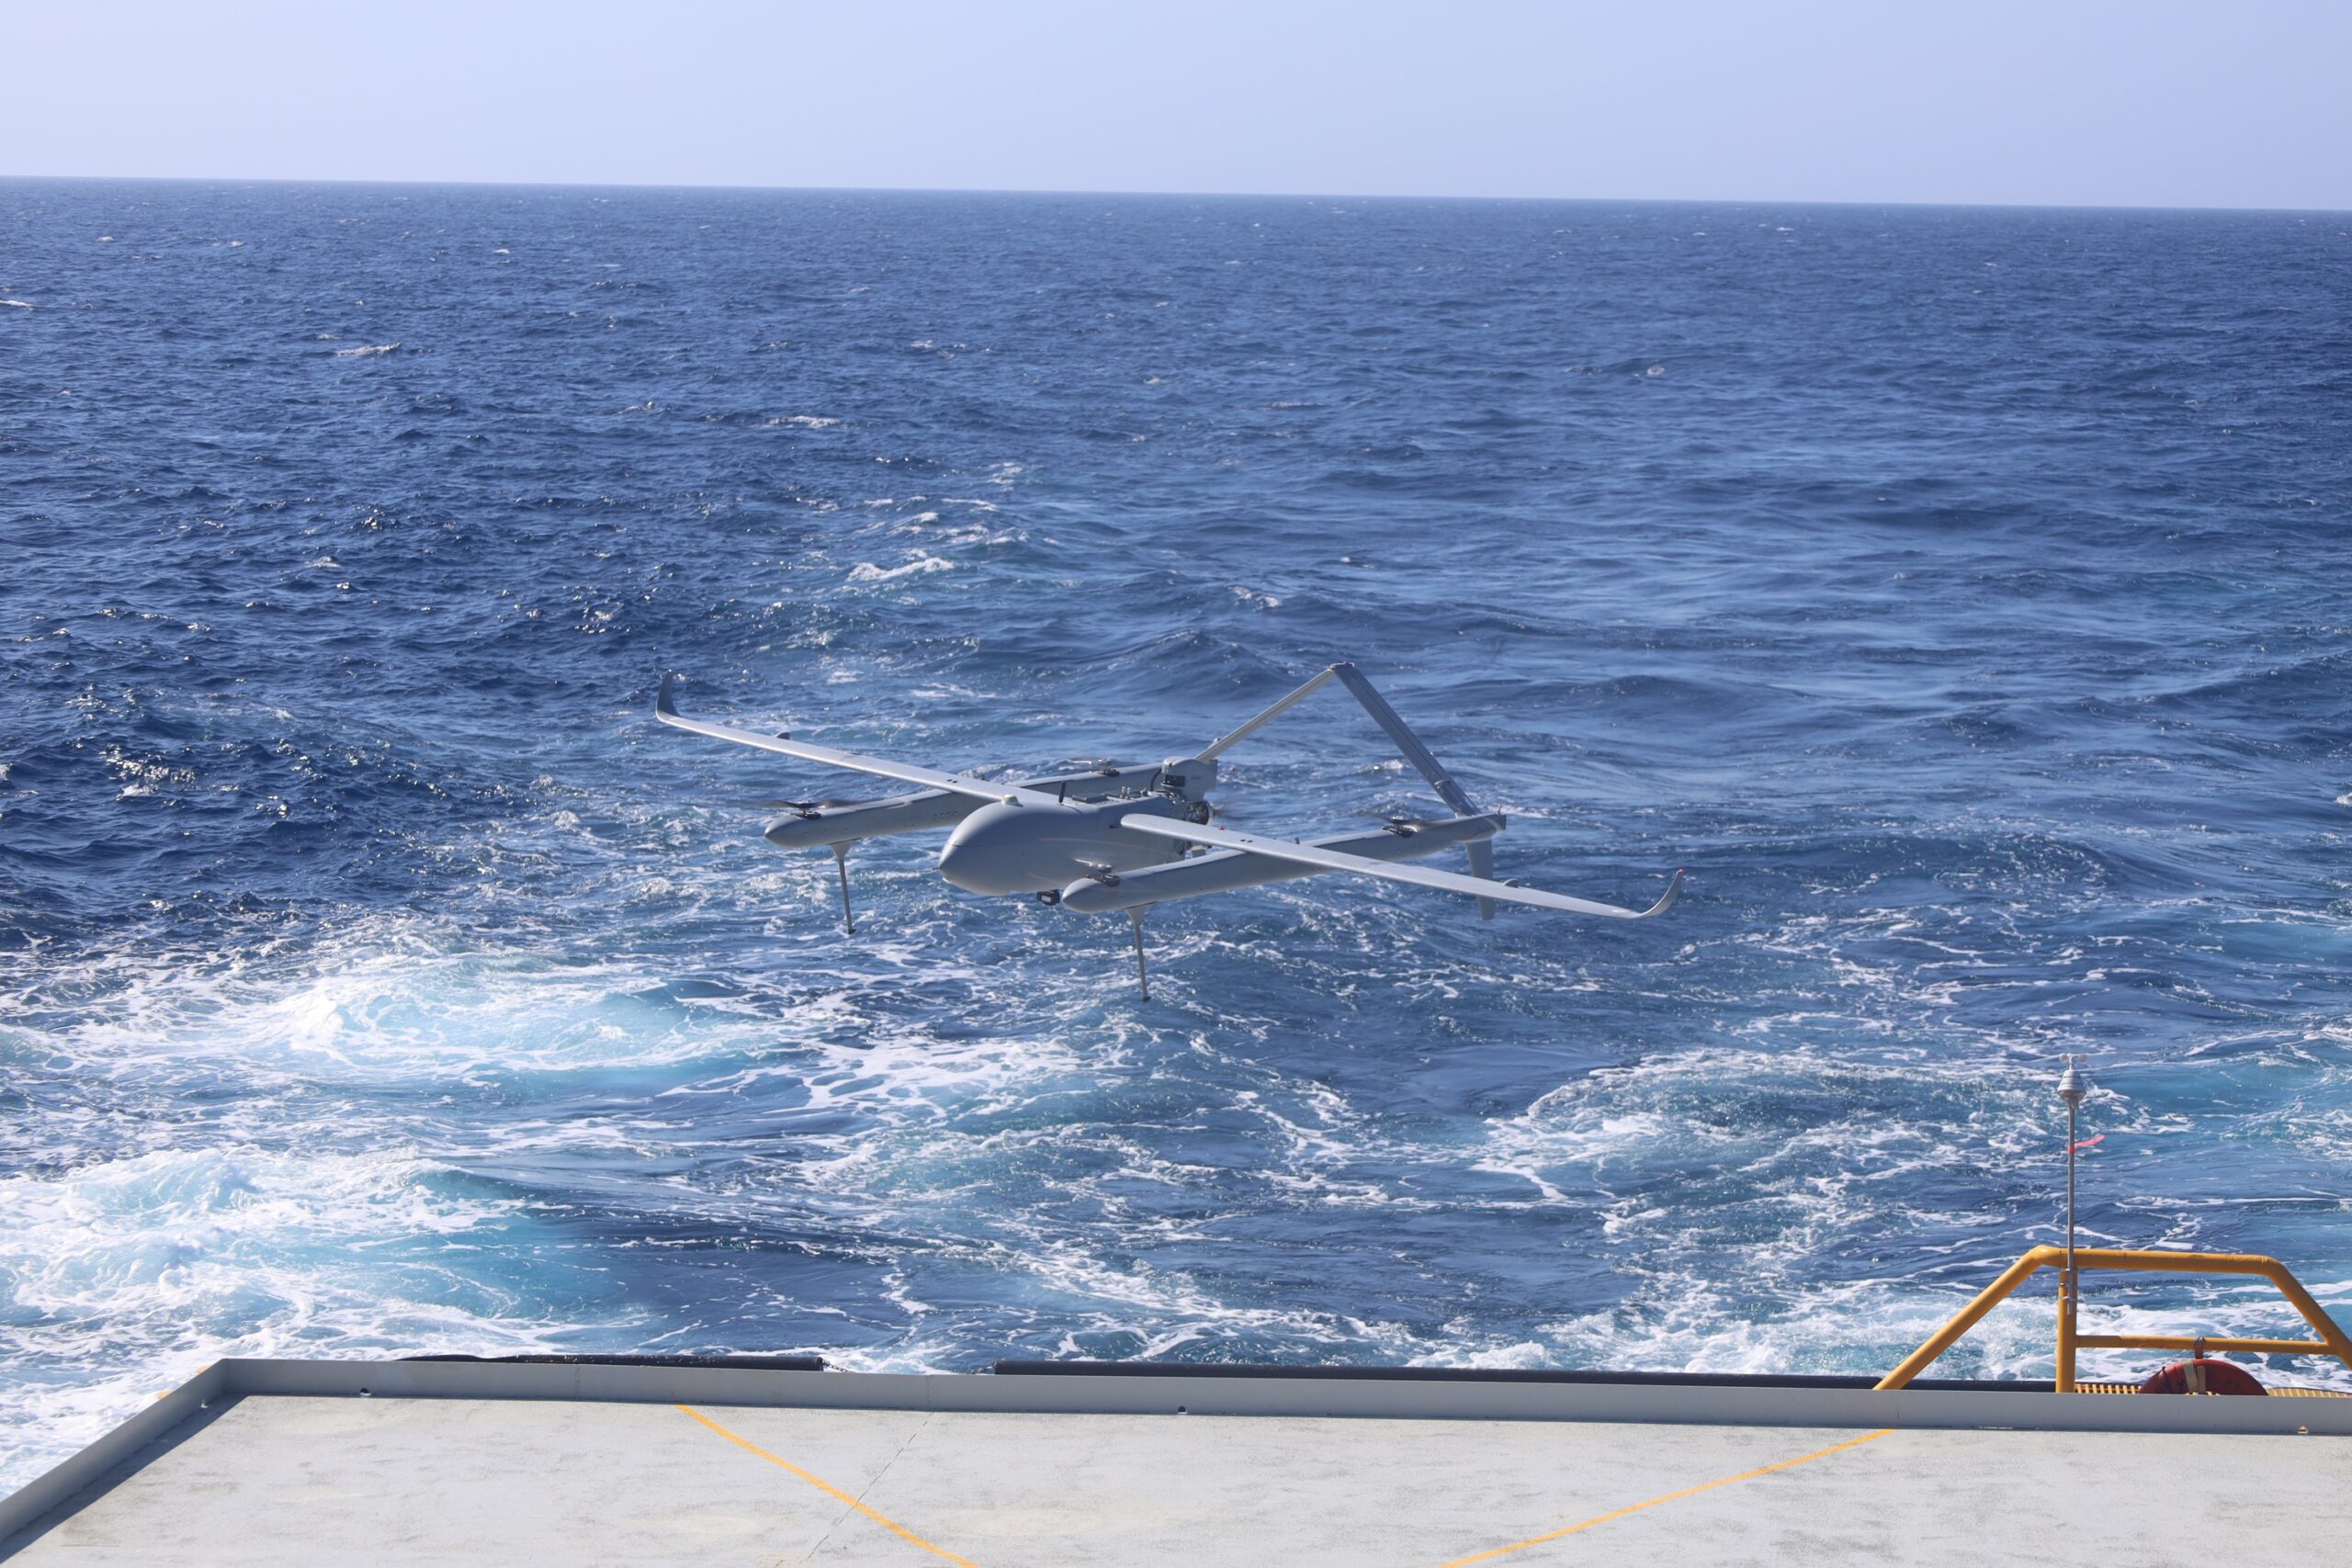 Textron Systems’ Aerosonde Expands to More Ships; VTOL Capability Could Add More